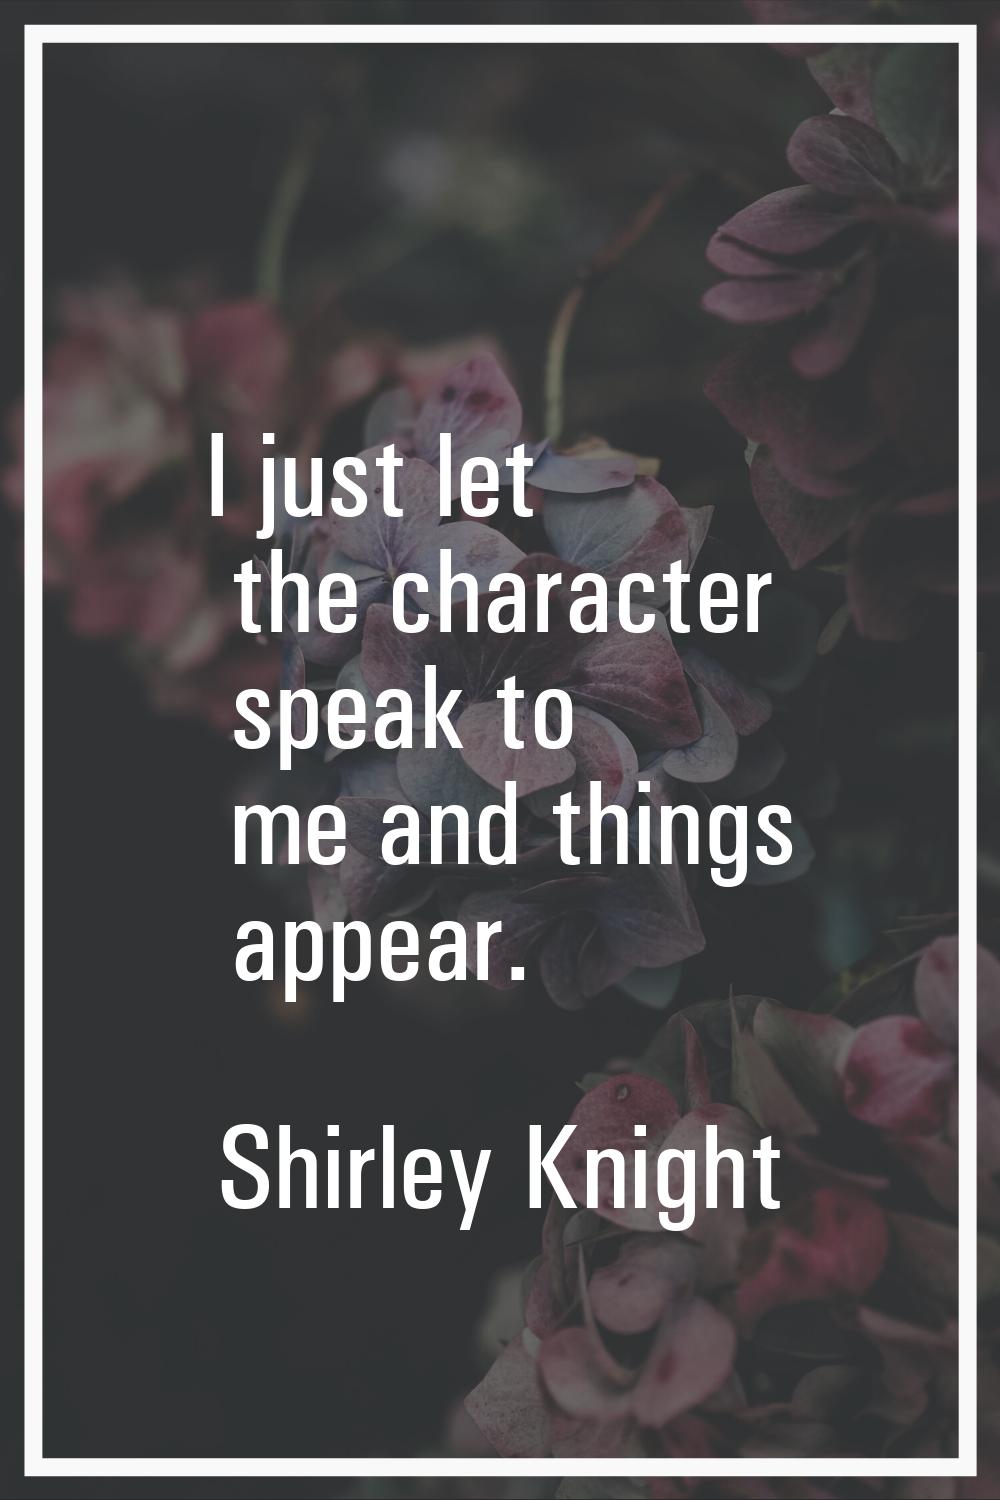 I just let the character speak to me and things appear.